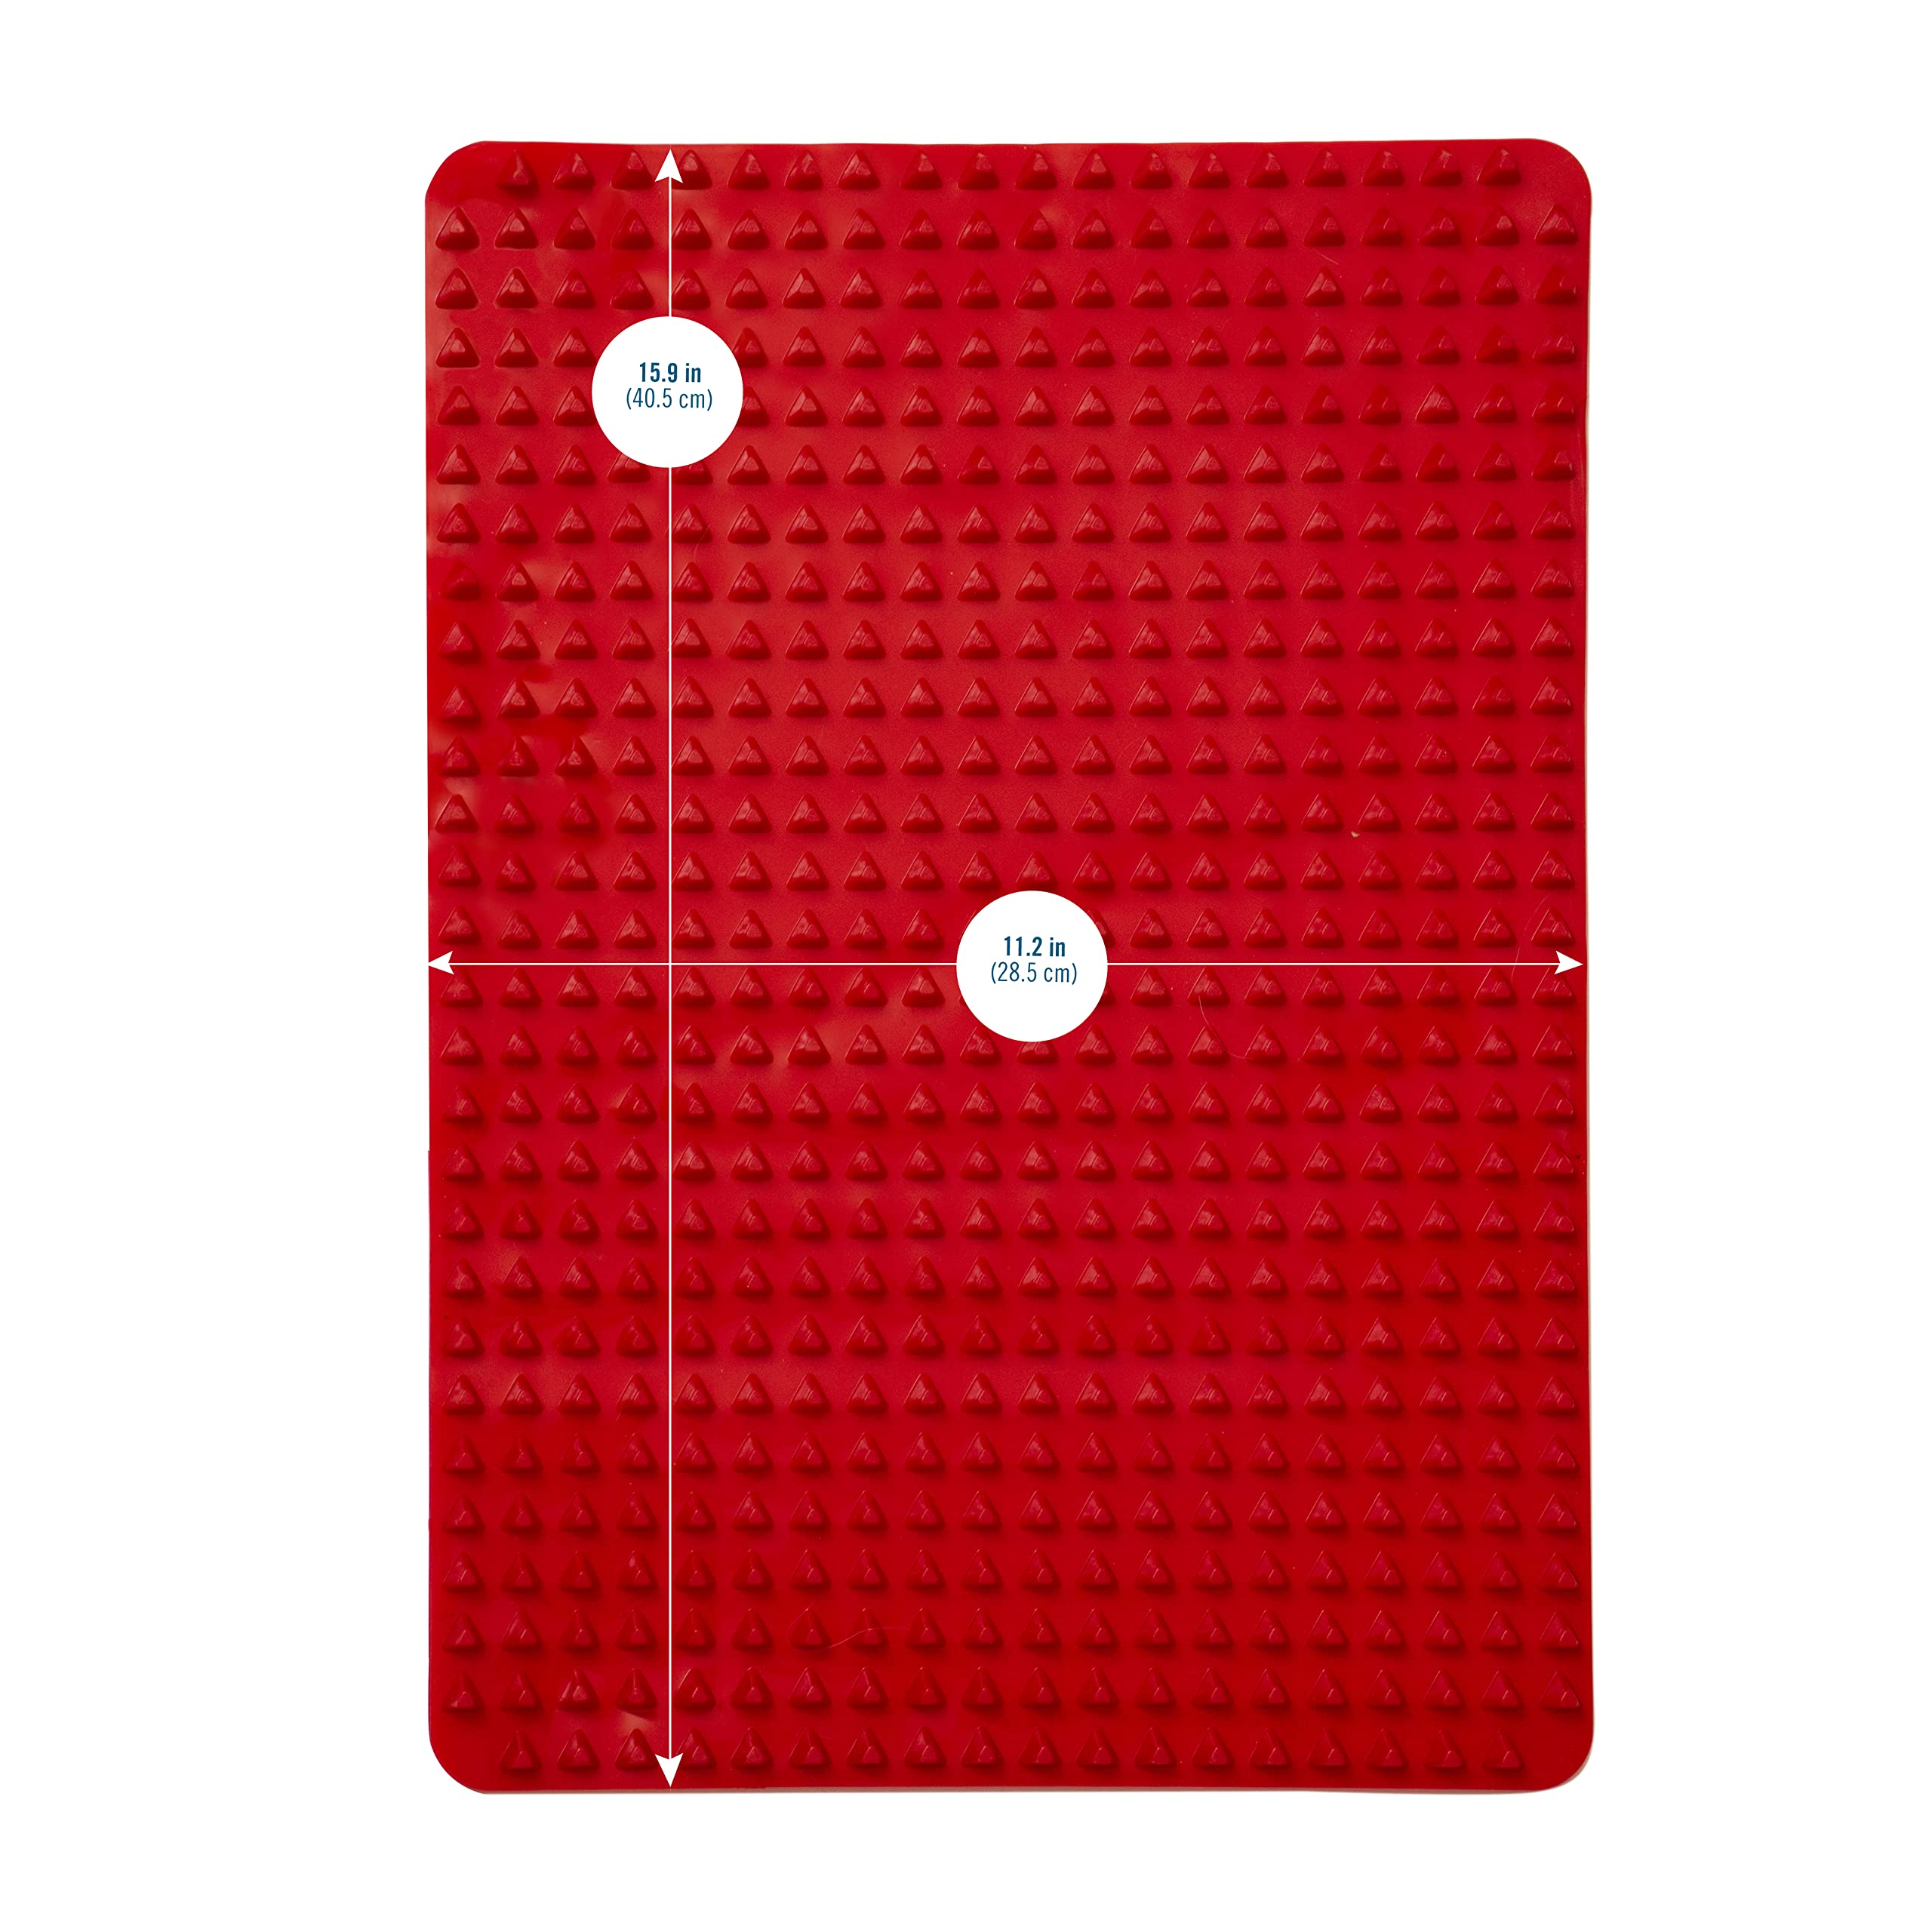 Baking with G&S Silicone Textured Baking Mats, Set of 2, Red, 15.9in x11.2in x 0.3in